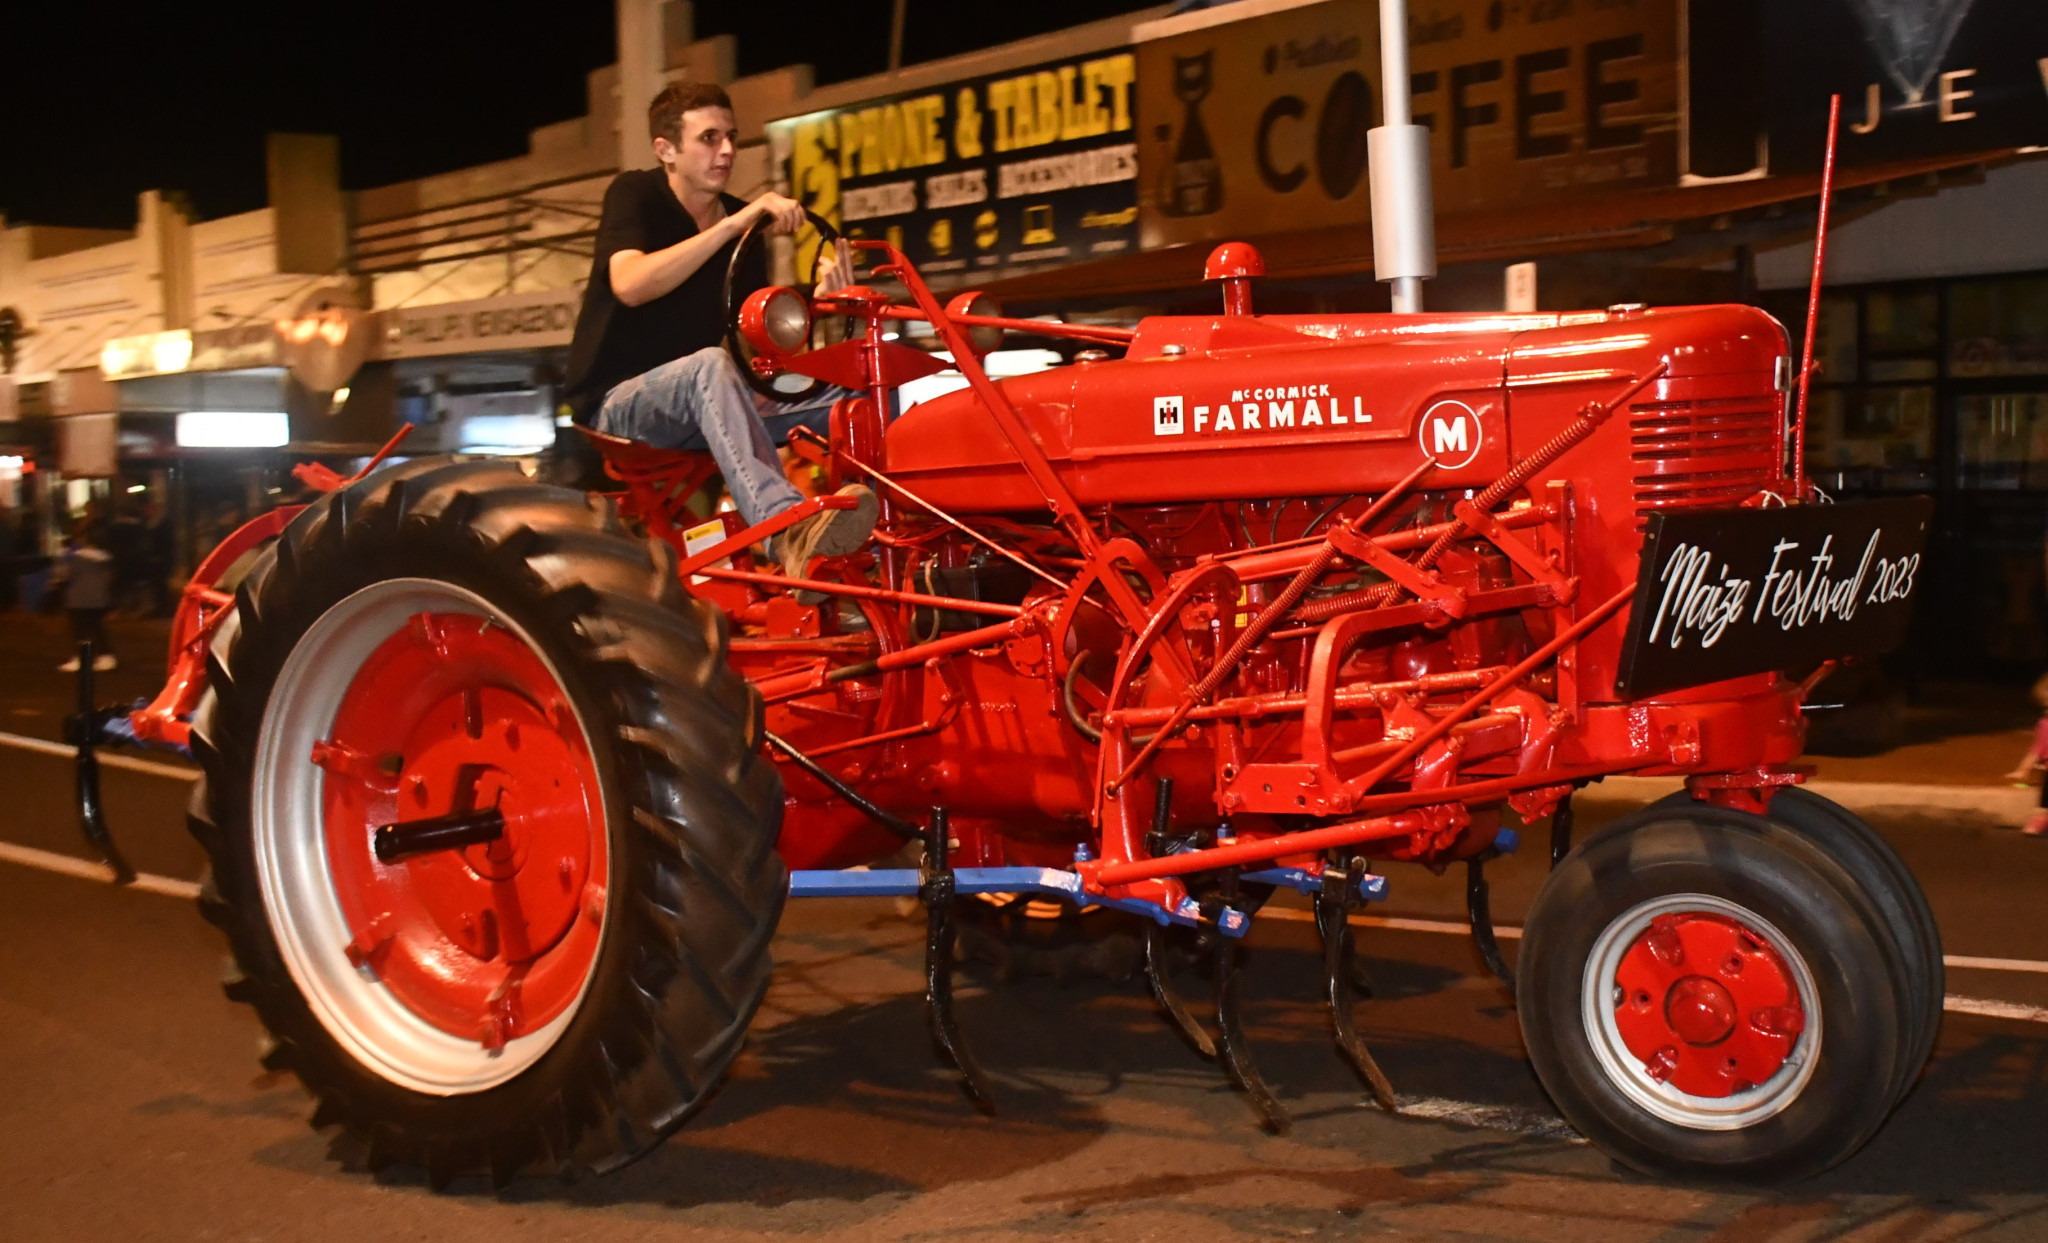 Farming history was a highlight in the parade. Pictured is a Farmall tractor.